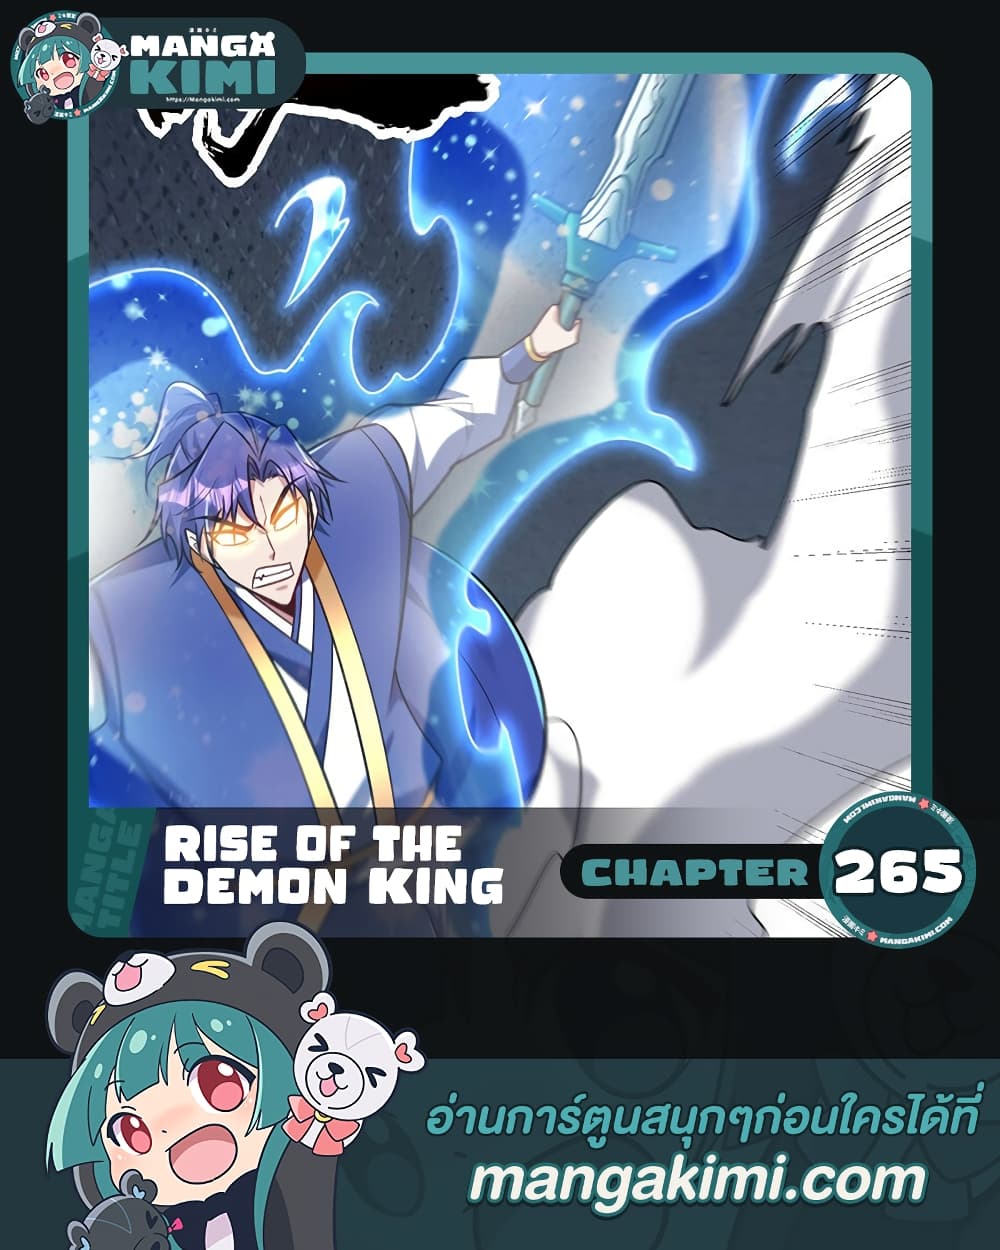 Rise of The Demon King เธฃเธธเนเธเธญเธฃเธธเธ“เนเธซเนเธเธฃเธฒเธเธฒเธเธตเธจเธฒเธ เธ•เธญเธเธ—เธตเน 265 (1)